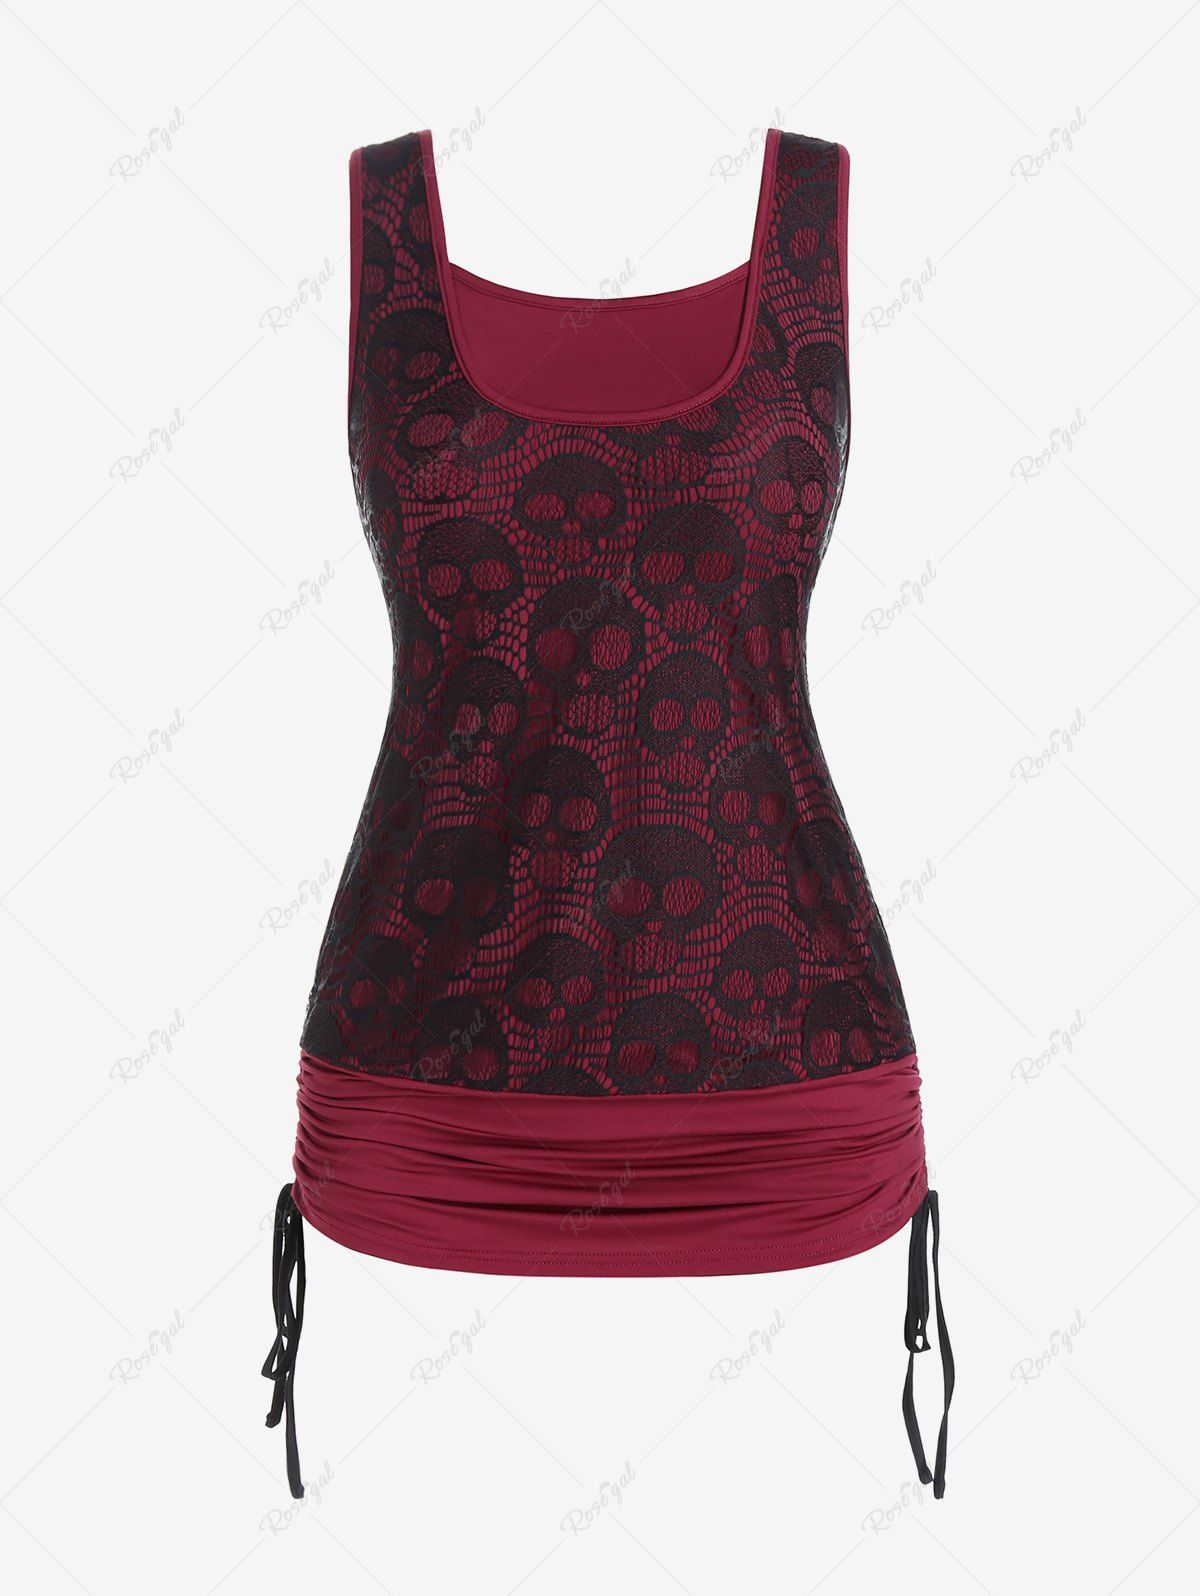 Latest Skull Lace Panel Cinched Gothic Tank Top  